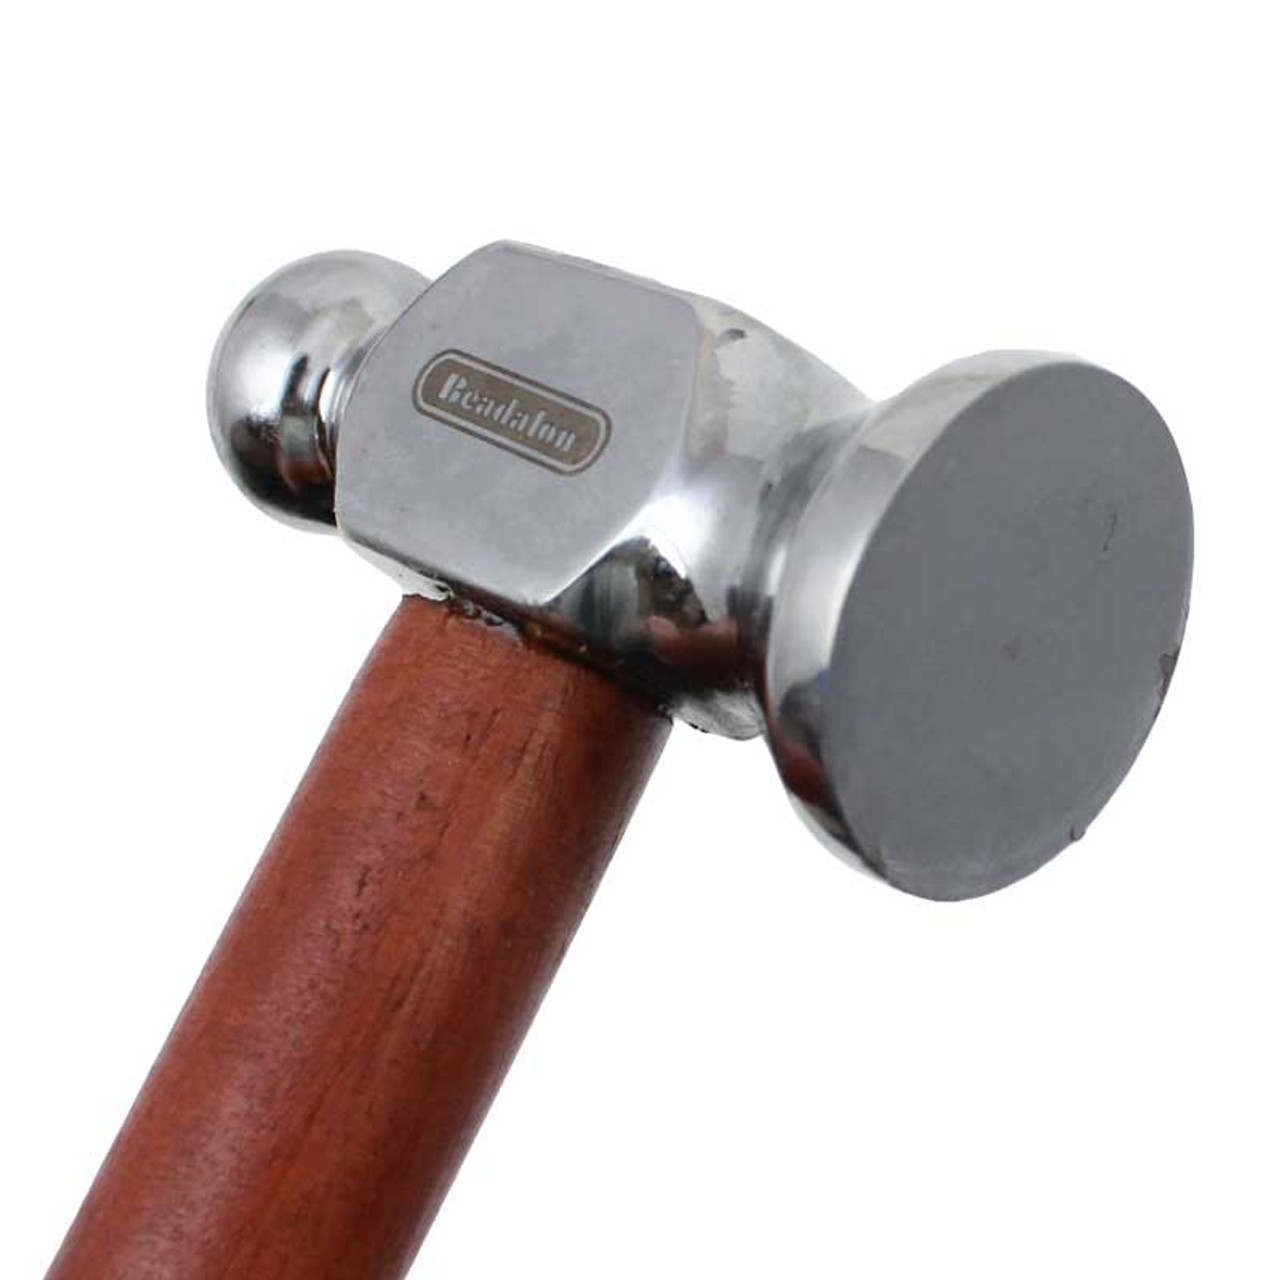 Chasing Hammer 1 inch Flat and Round Head Jewelers Hammer